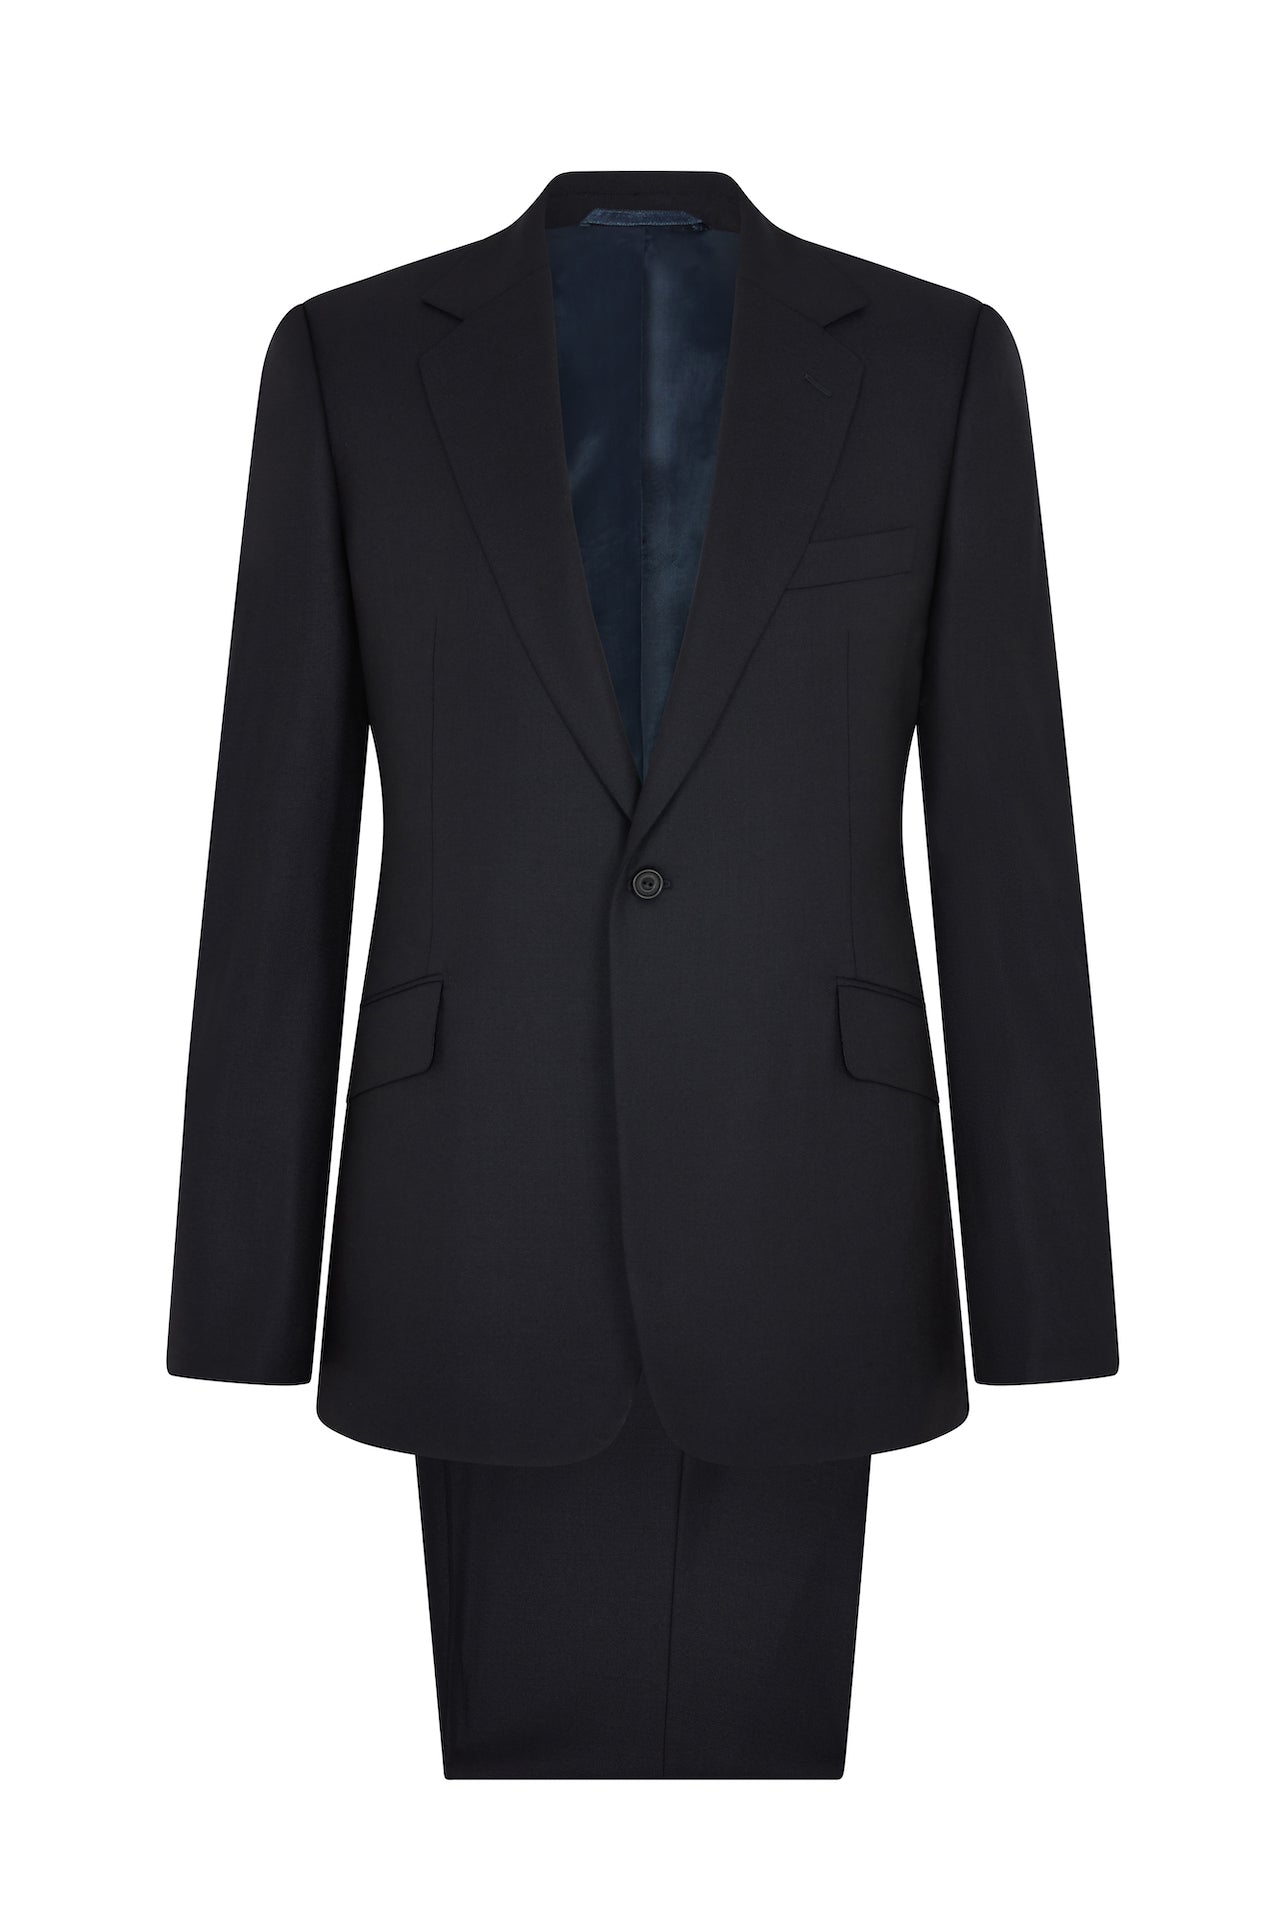 Navy Six-Ply Panama Single Breasted Suit